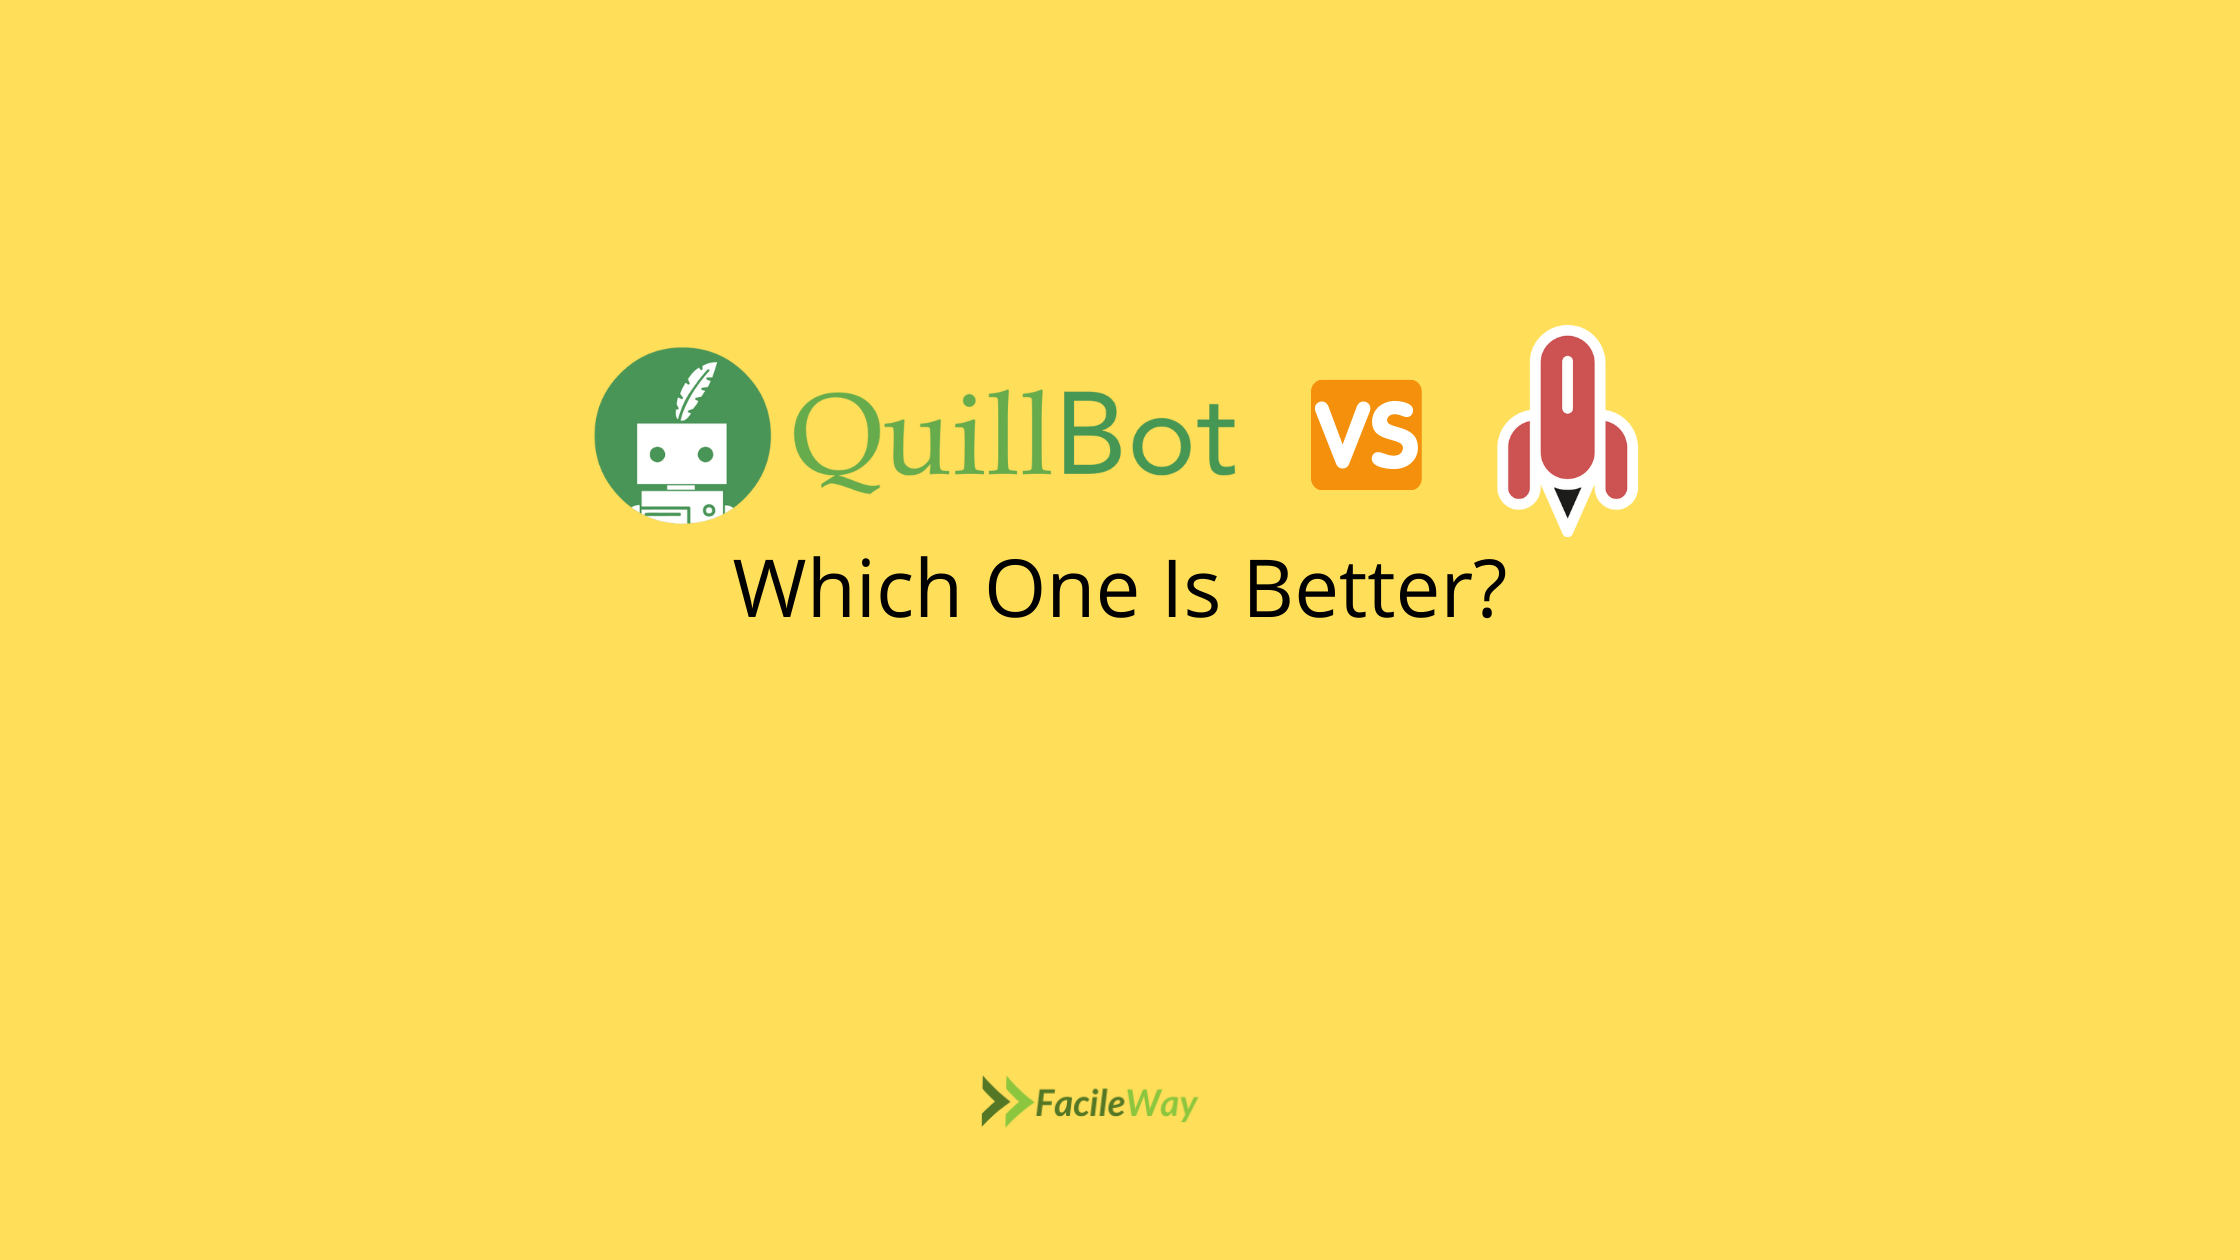 Quill bot